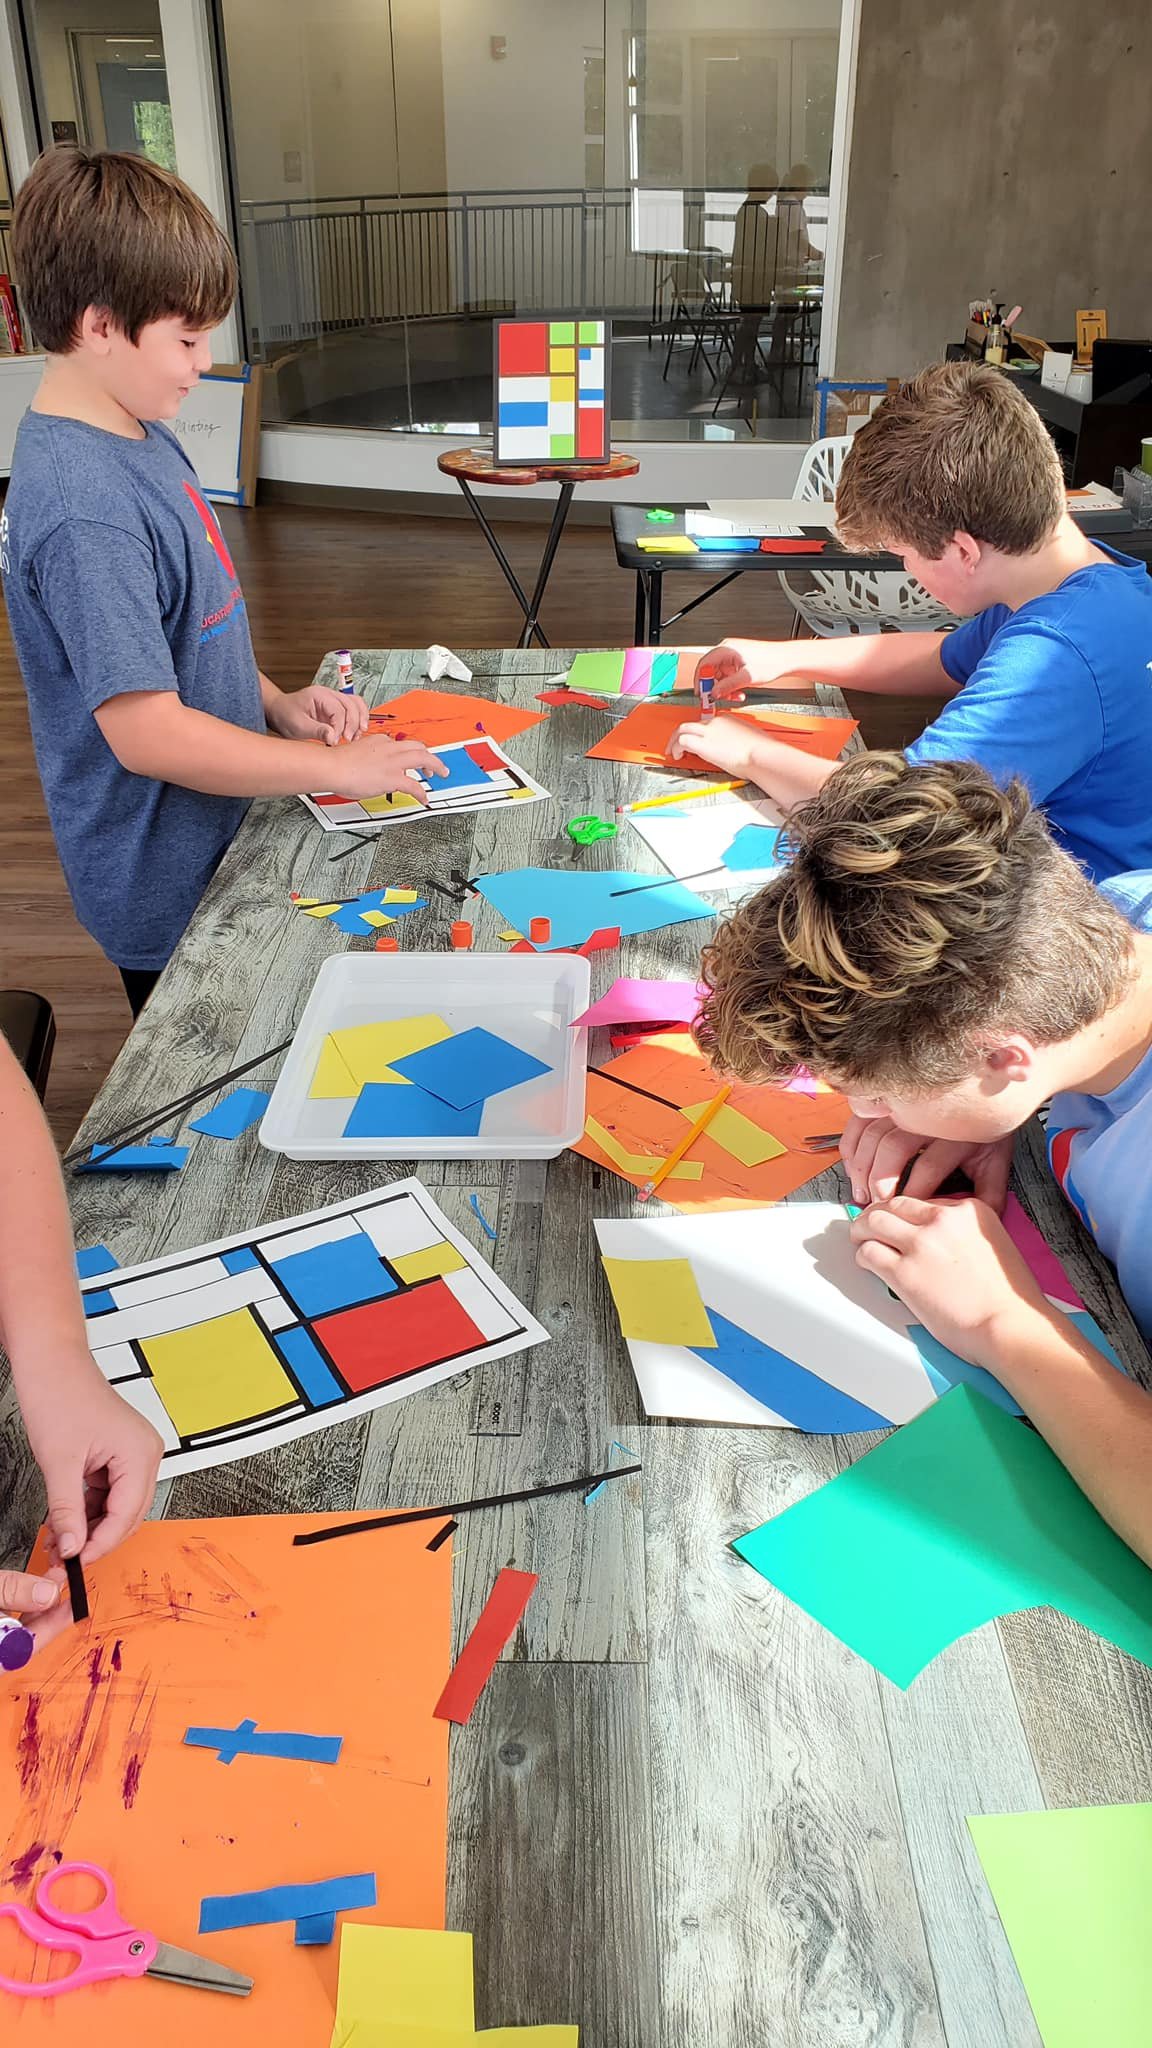 Students with learning disabilities build on Dyslexic Strengths - Creativity in Art Class at Educational Pathways Academy, School for Dyslexia in Florida.jpg